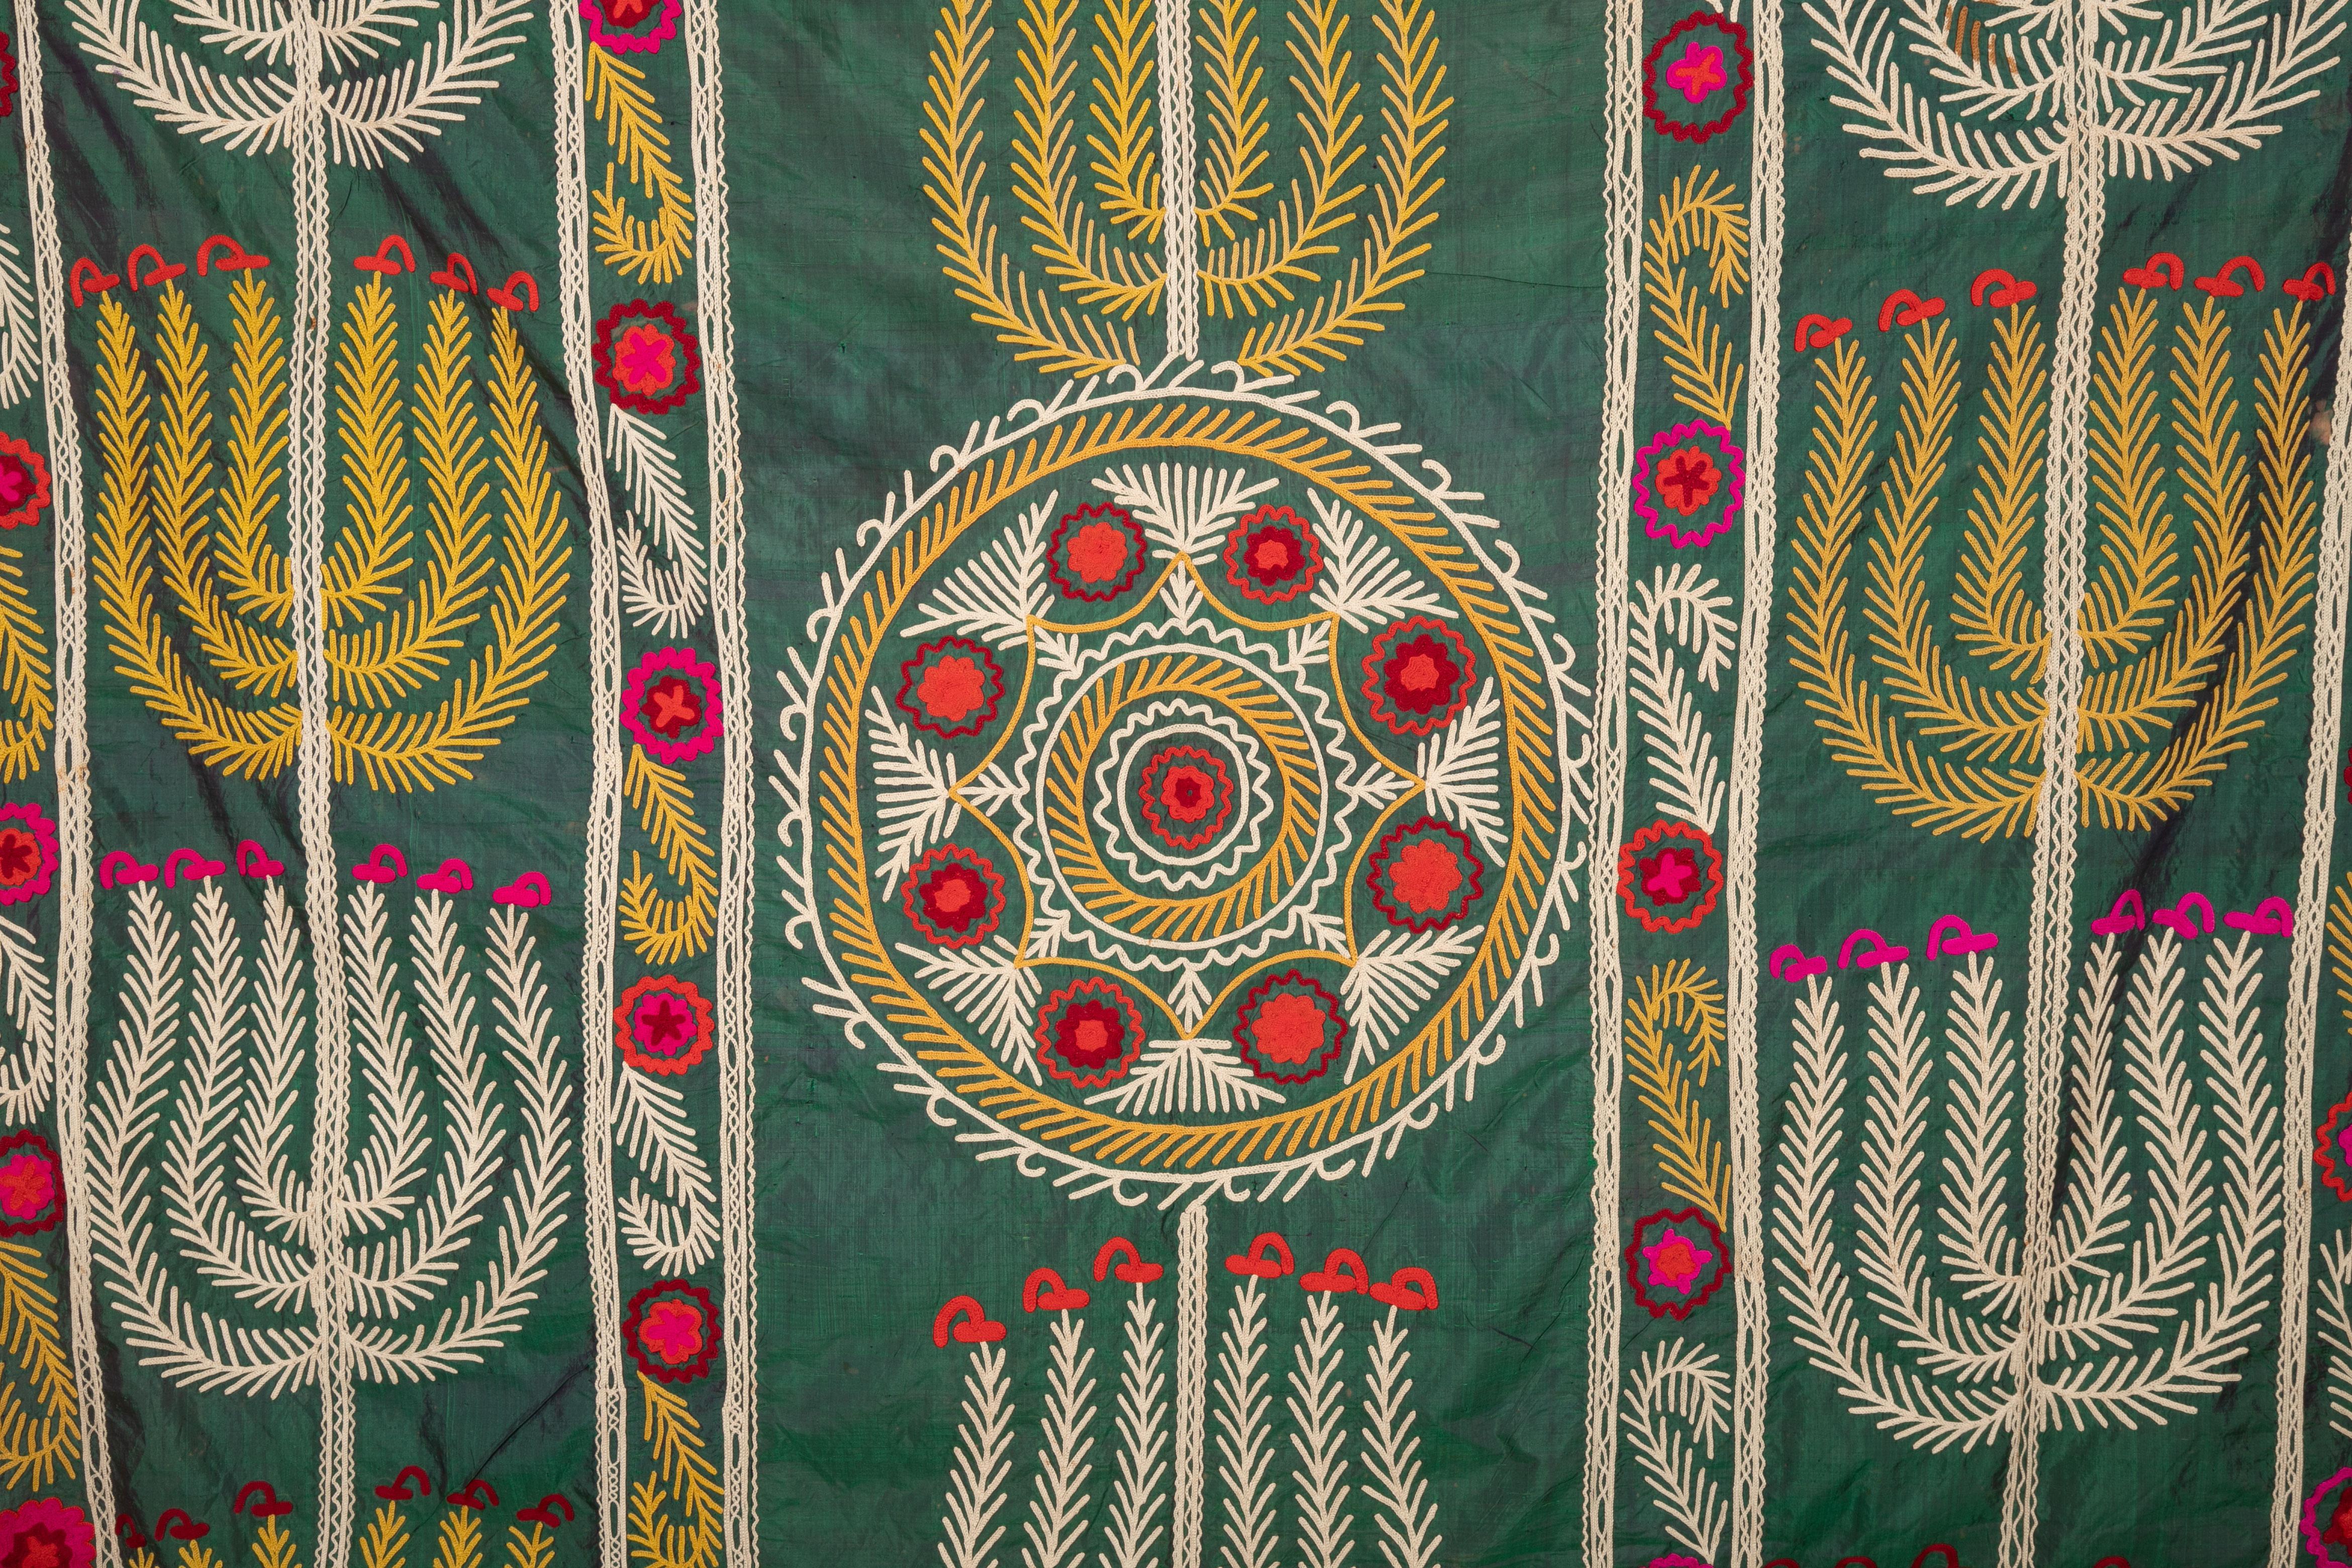 It is silk embroidery on a silk background.